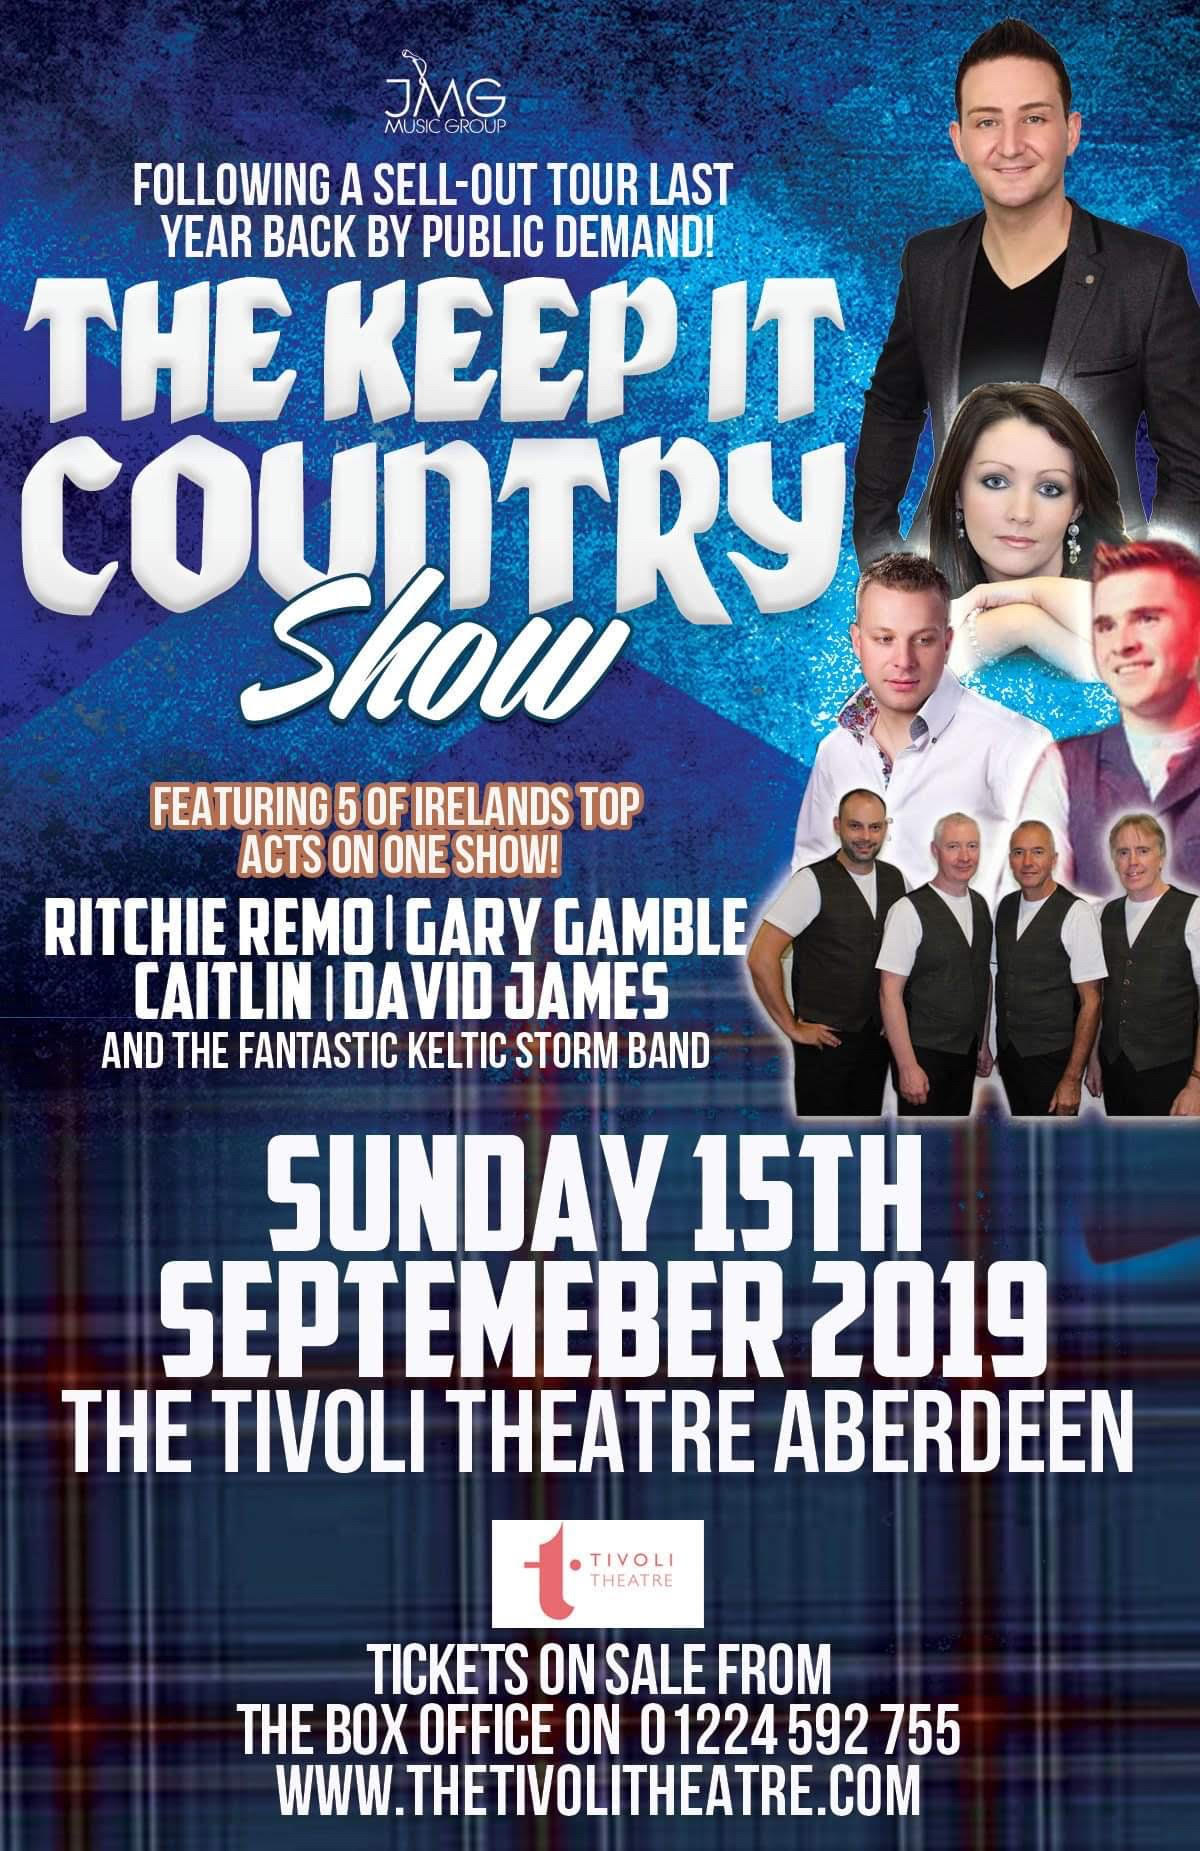 The Keep It Country Show